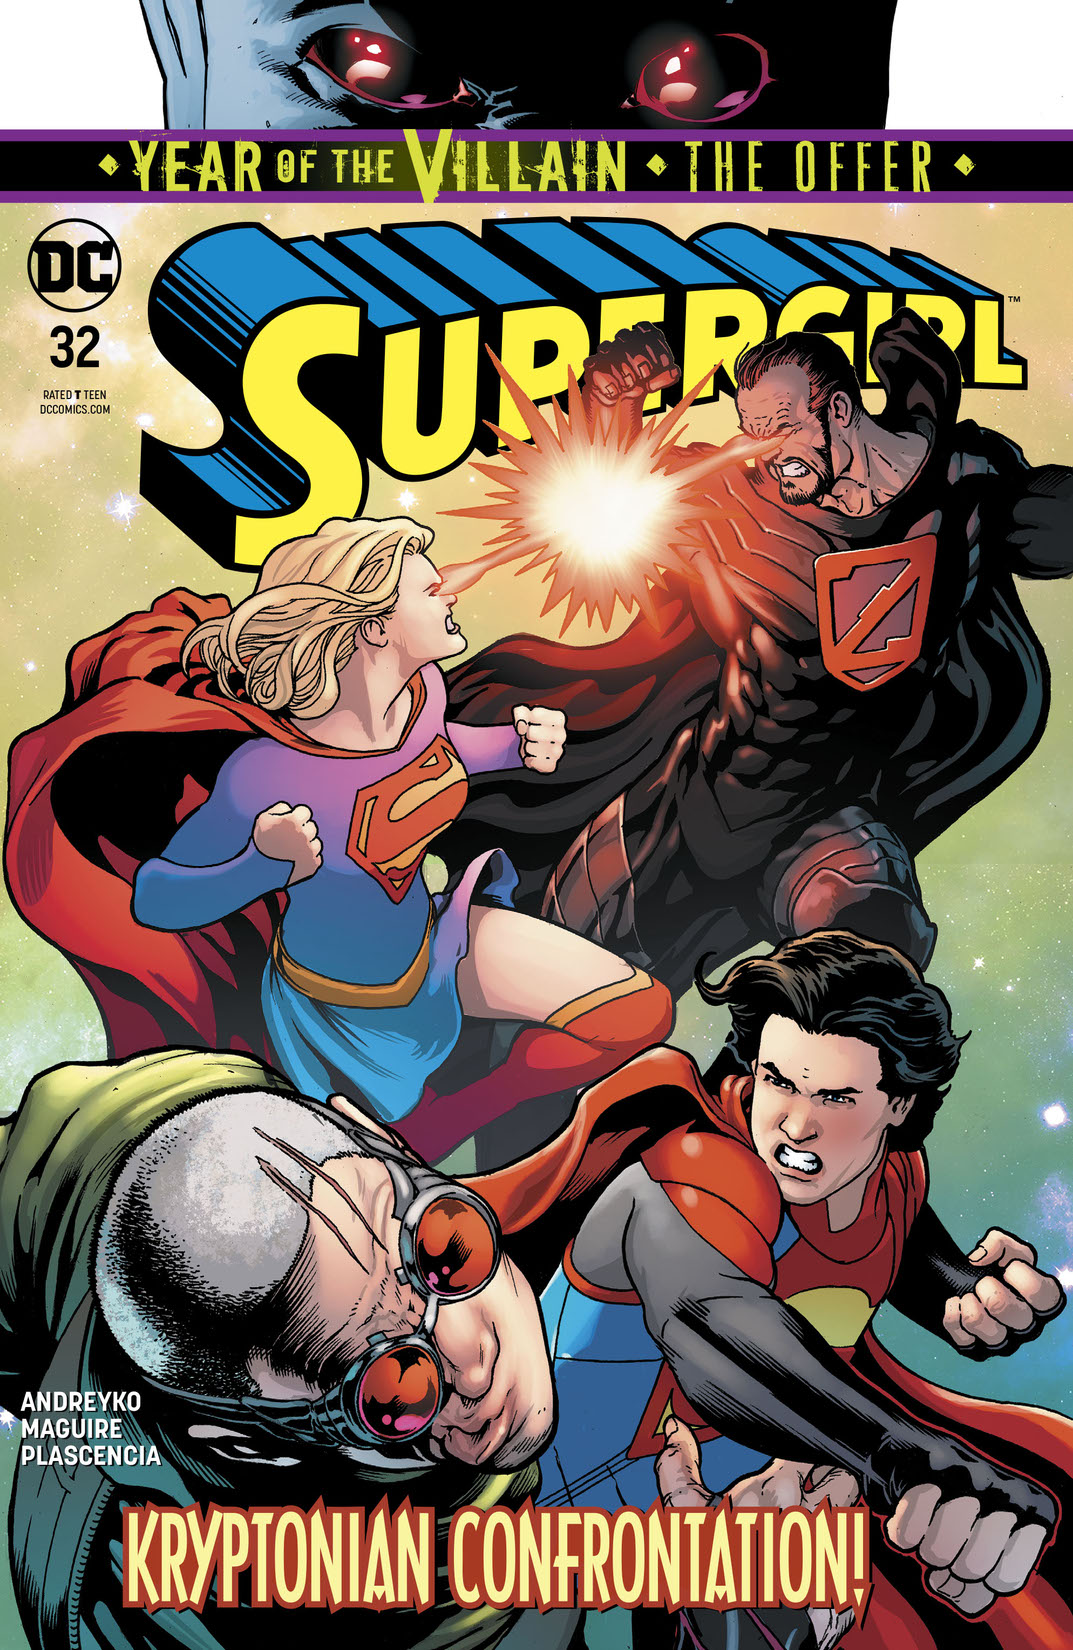 Supergirl (2016-) #32 preview images